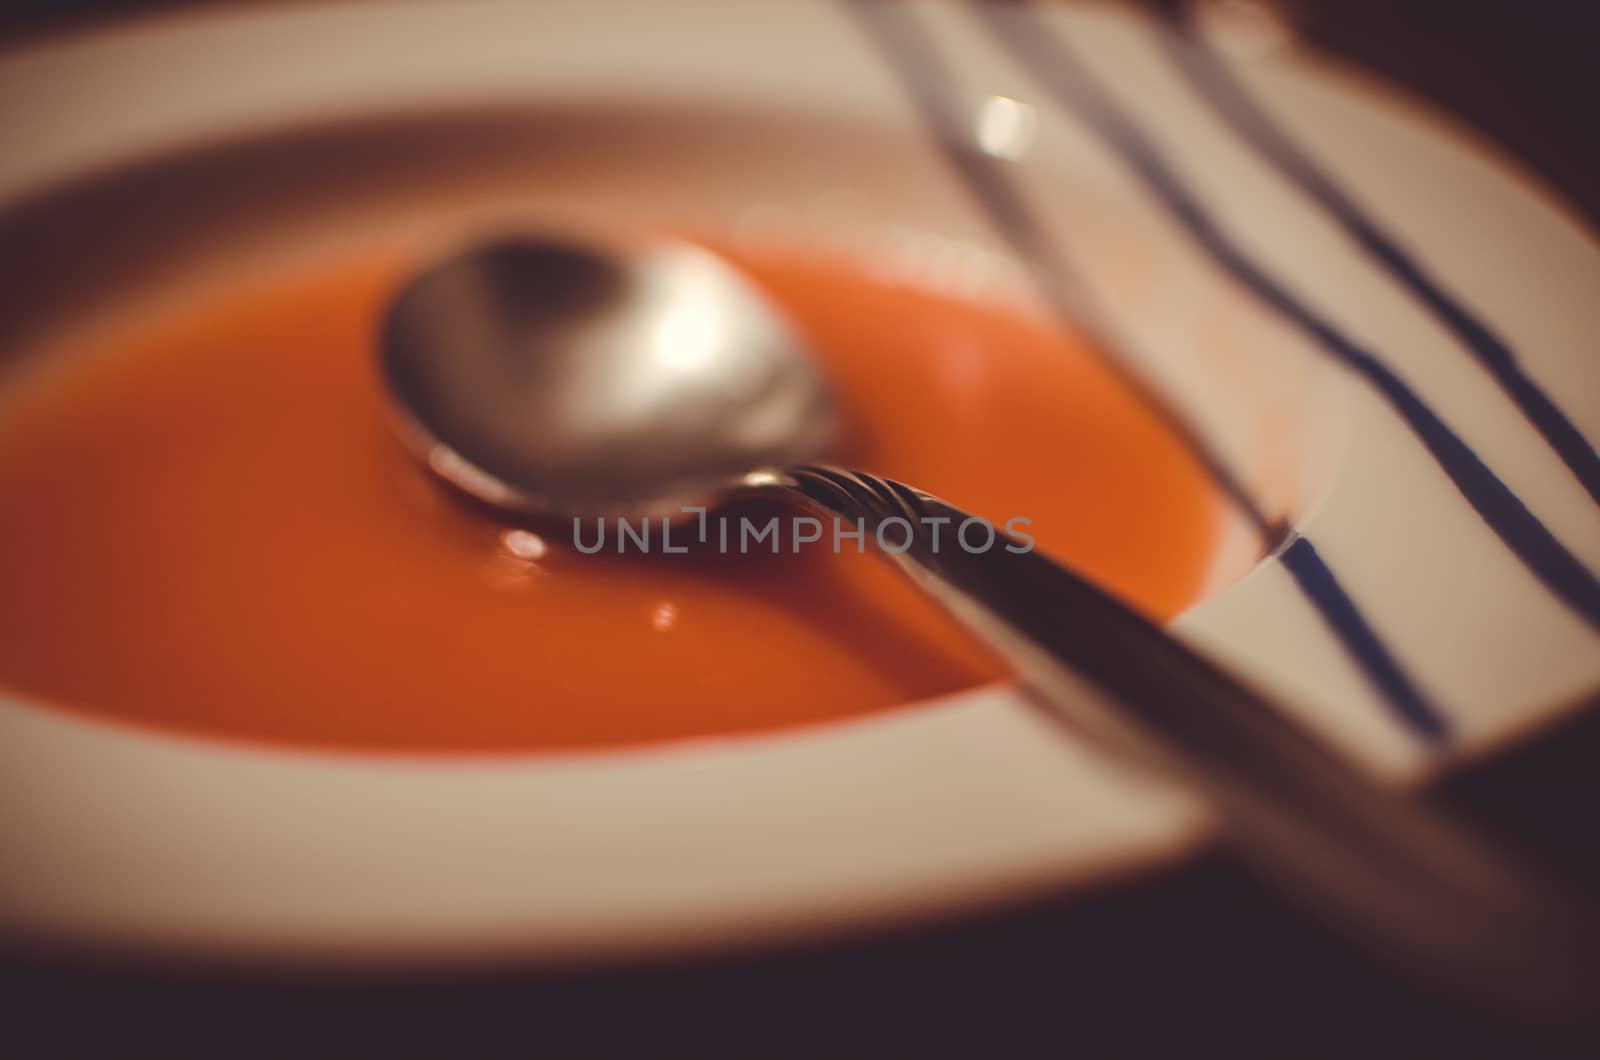 Spoon reveals some waves that are not present in the tomato soup contained in the plate.